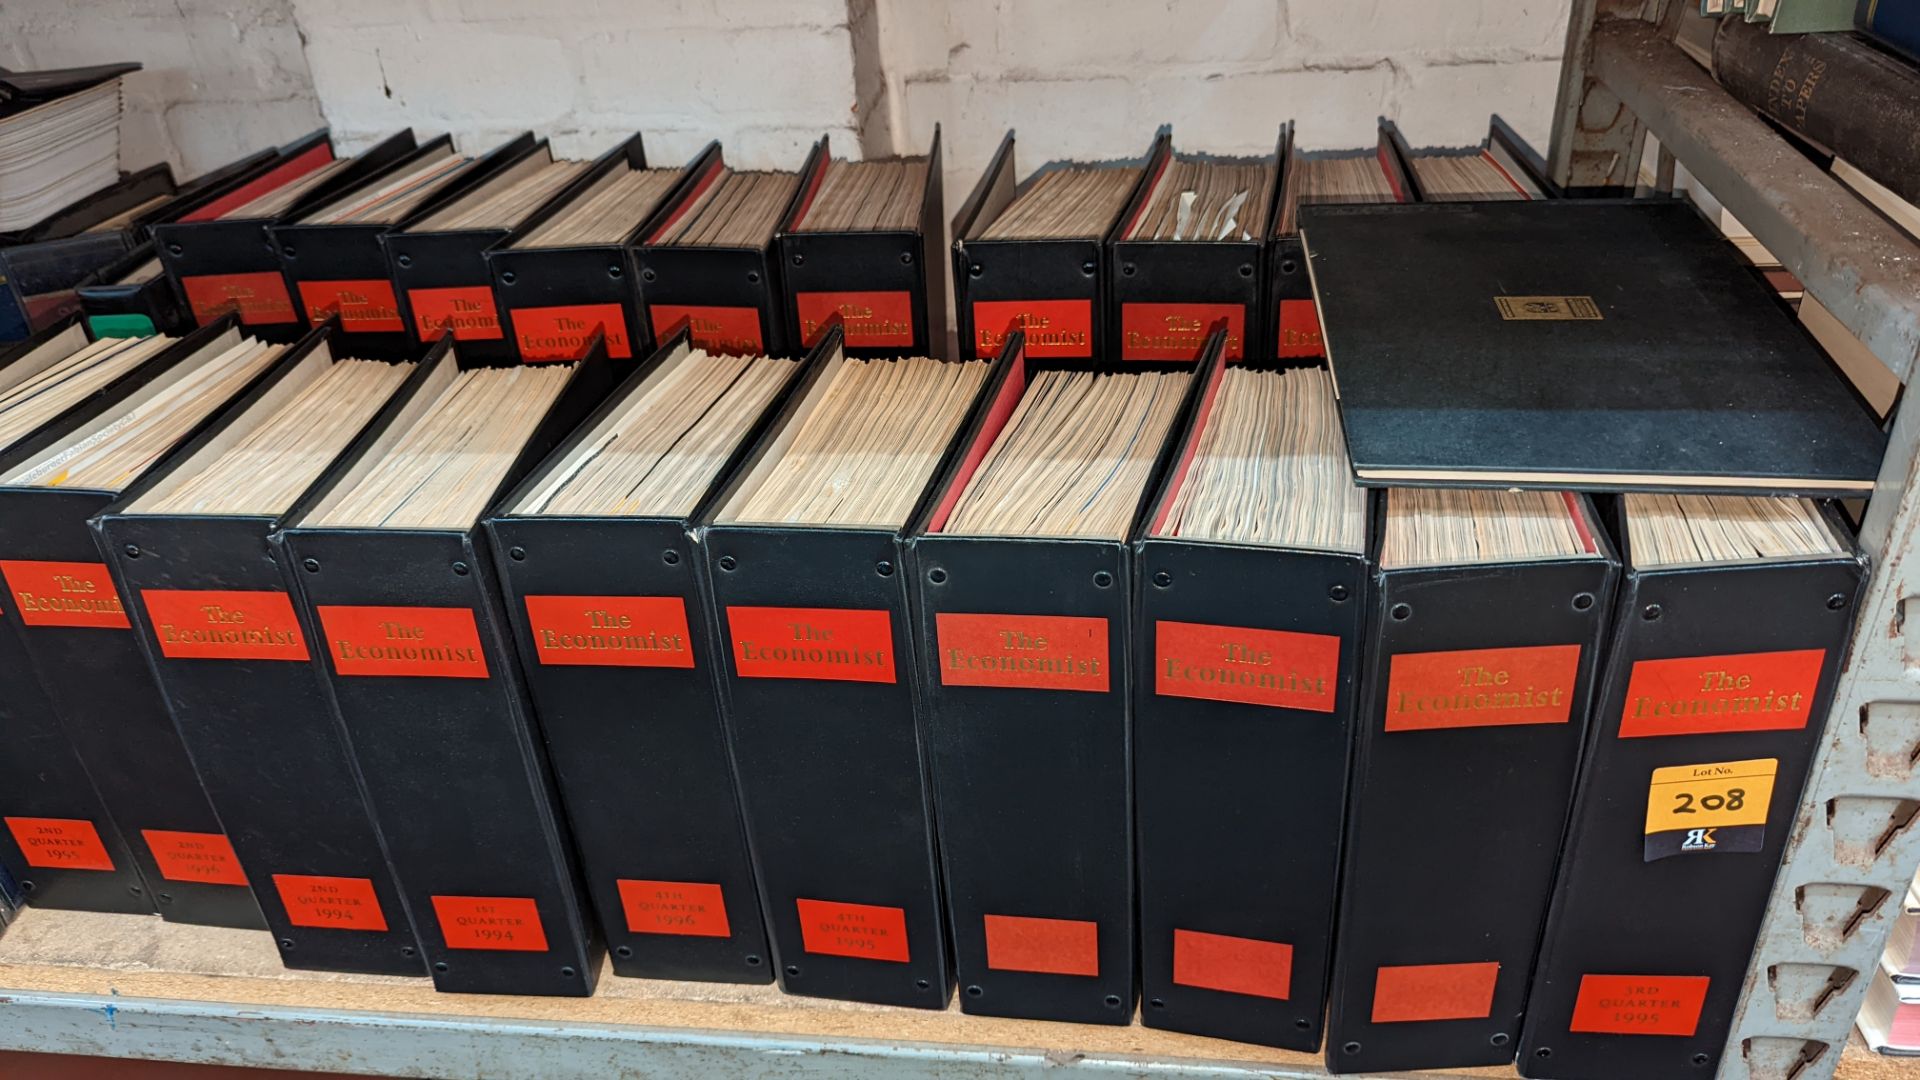 Large quantity of bound copies of The Economist & other journals - this lot comprises the total cont - Image 3 of 5